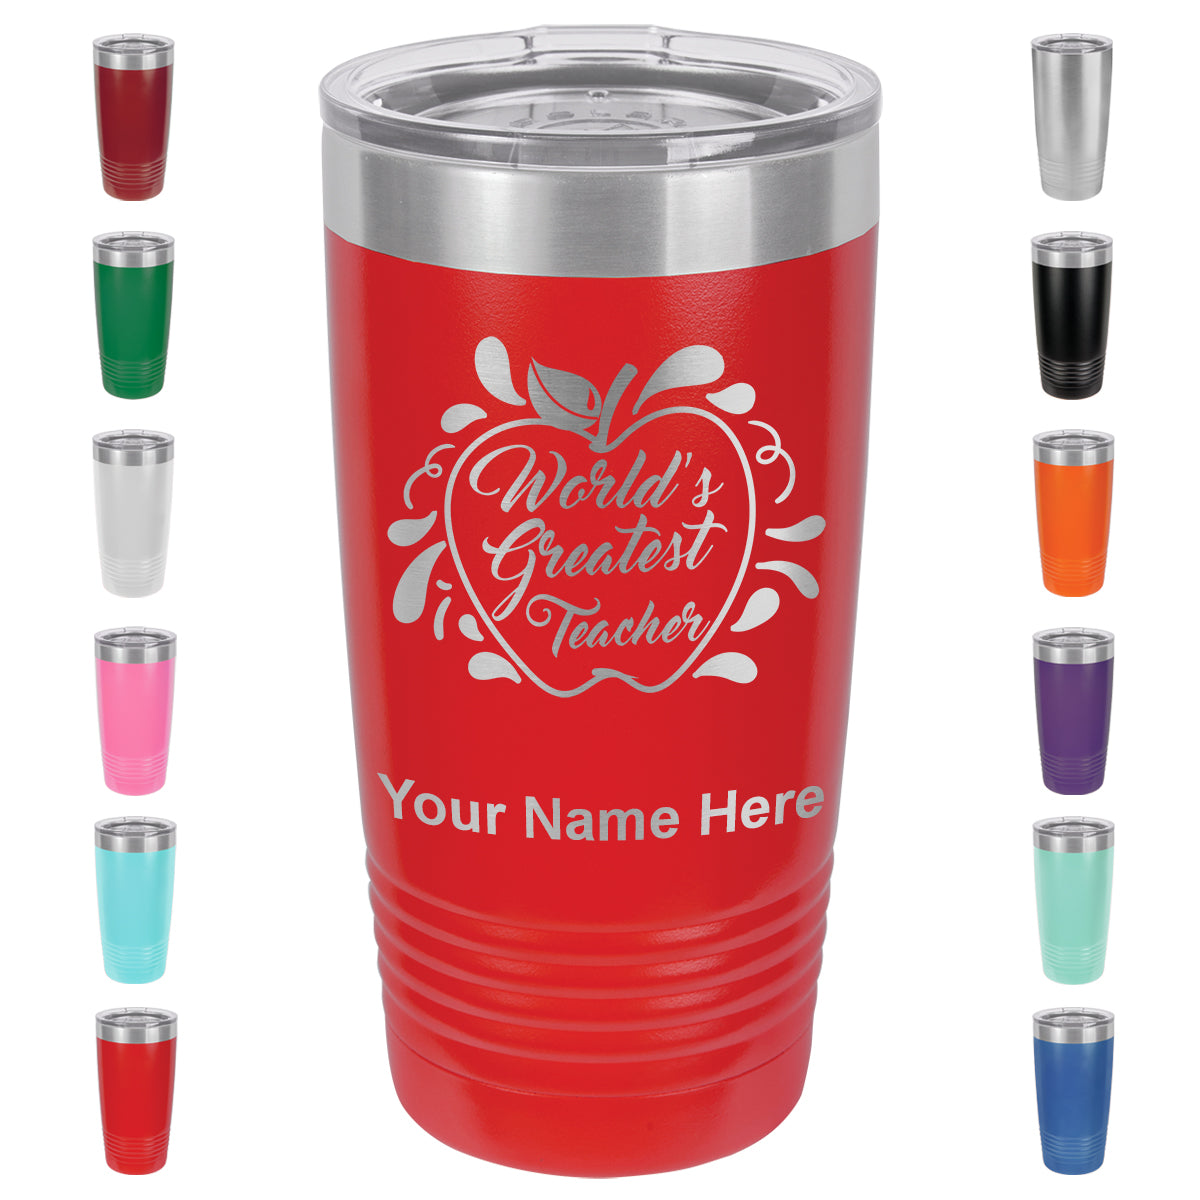 20oz Vacuum Insulated Tumbler Mug, World's Greatest Teacher, Personalized Engraving Included